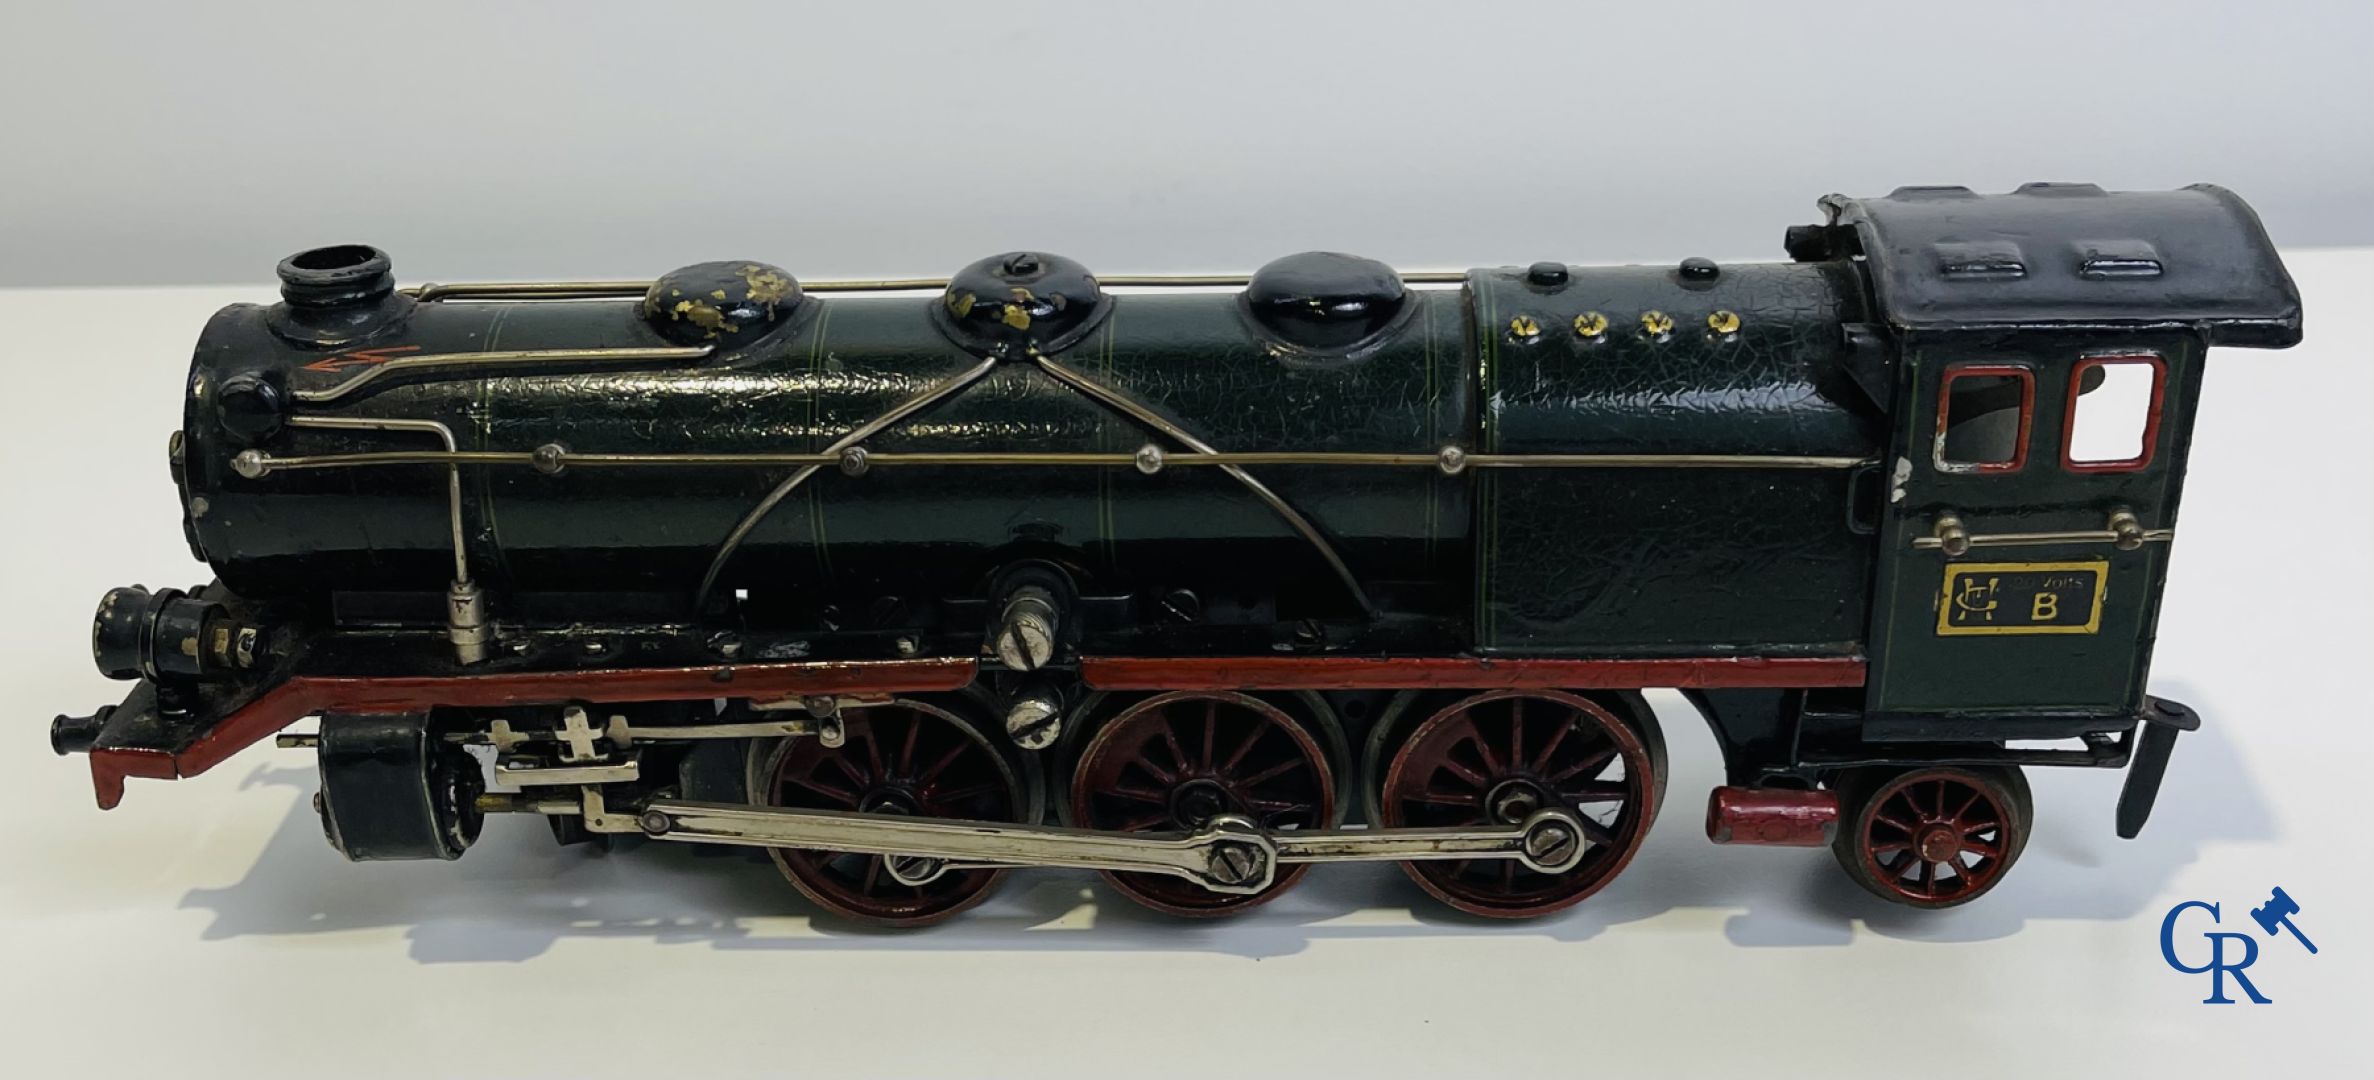 Old toys: Märklin, Locomotive with towing tender and dining car.
About 1930. - Image 9 of 32